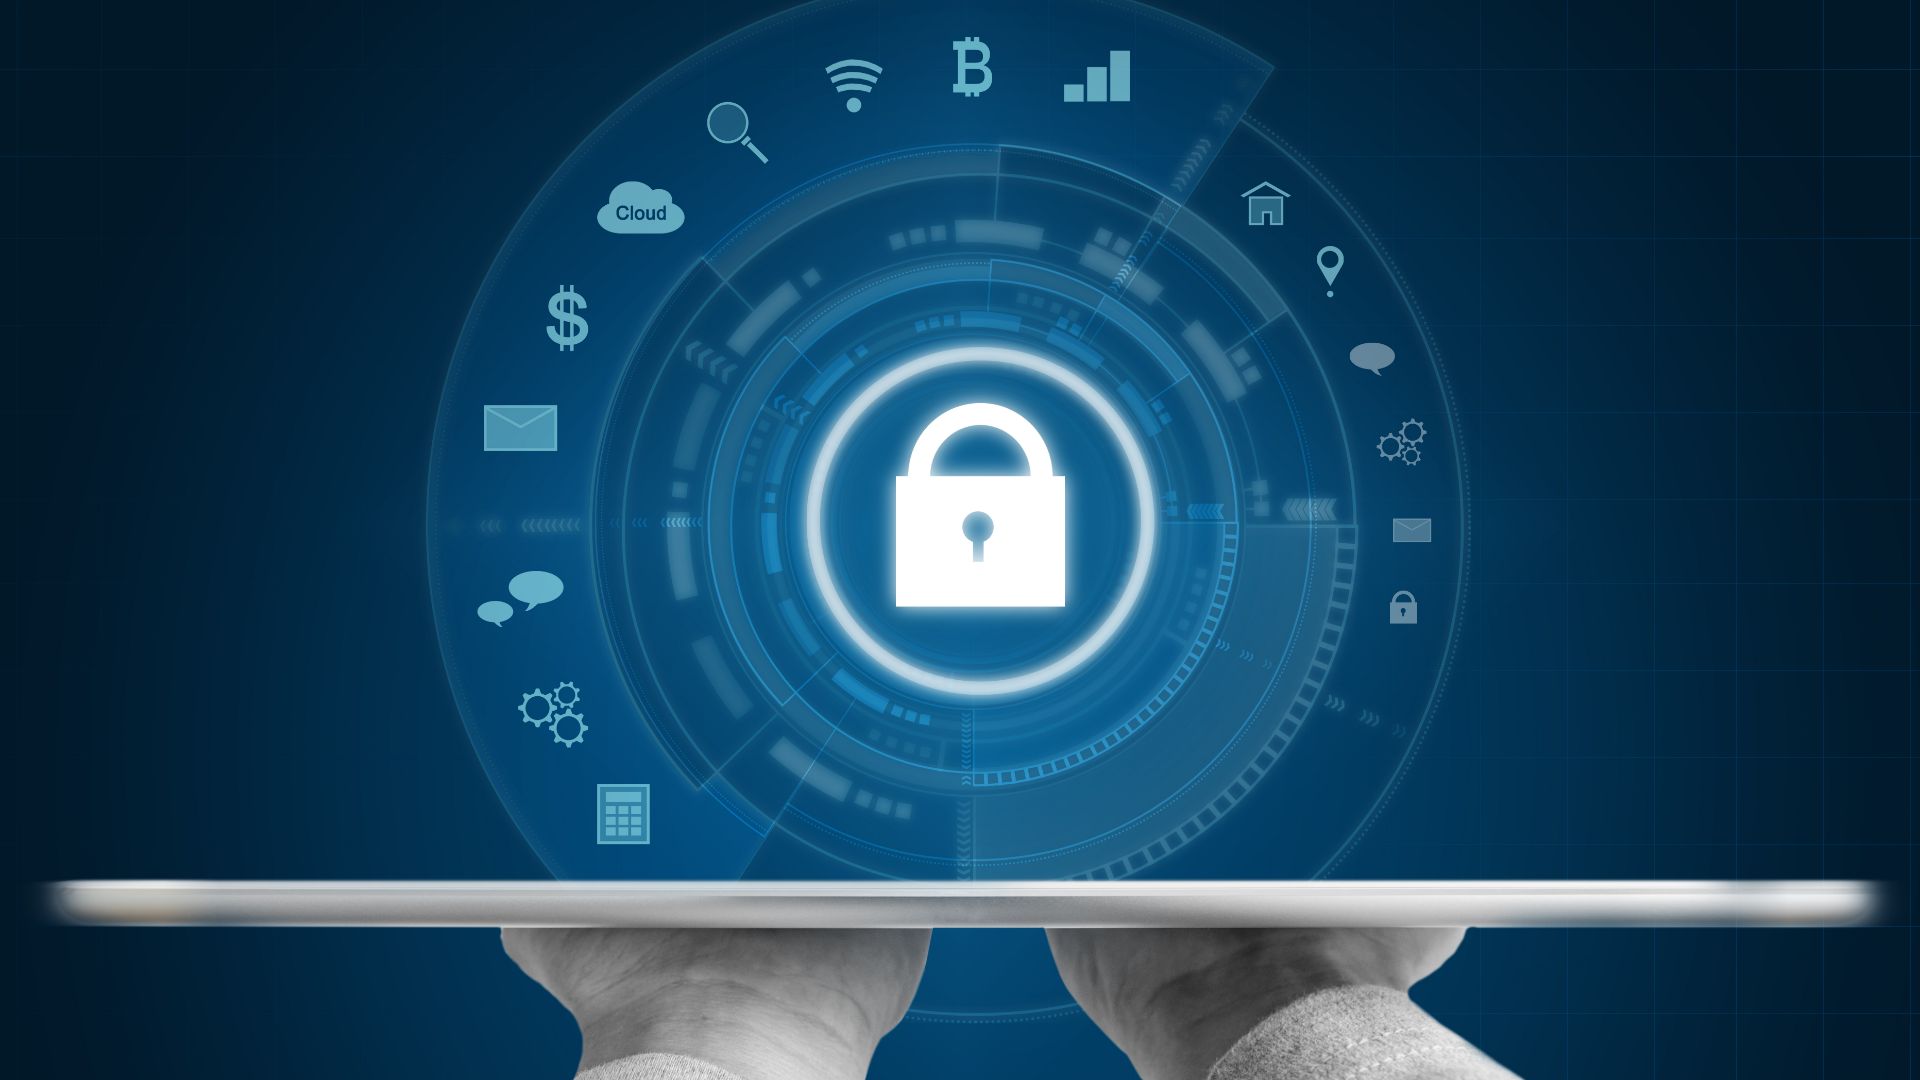 What Measure Should Be Taken To Secure IoT Devices?